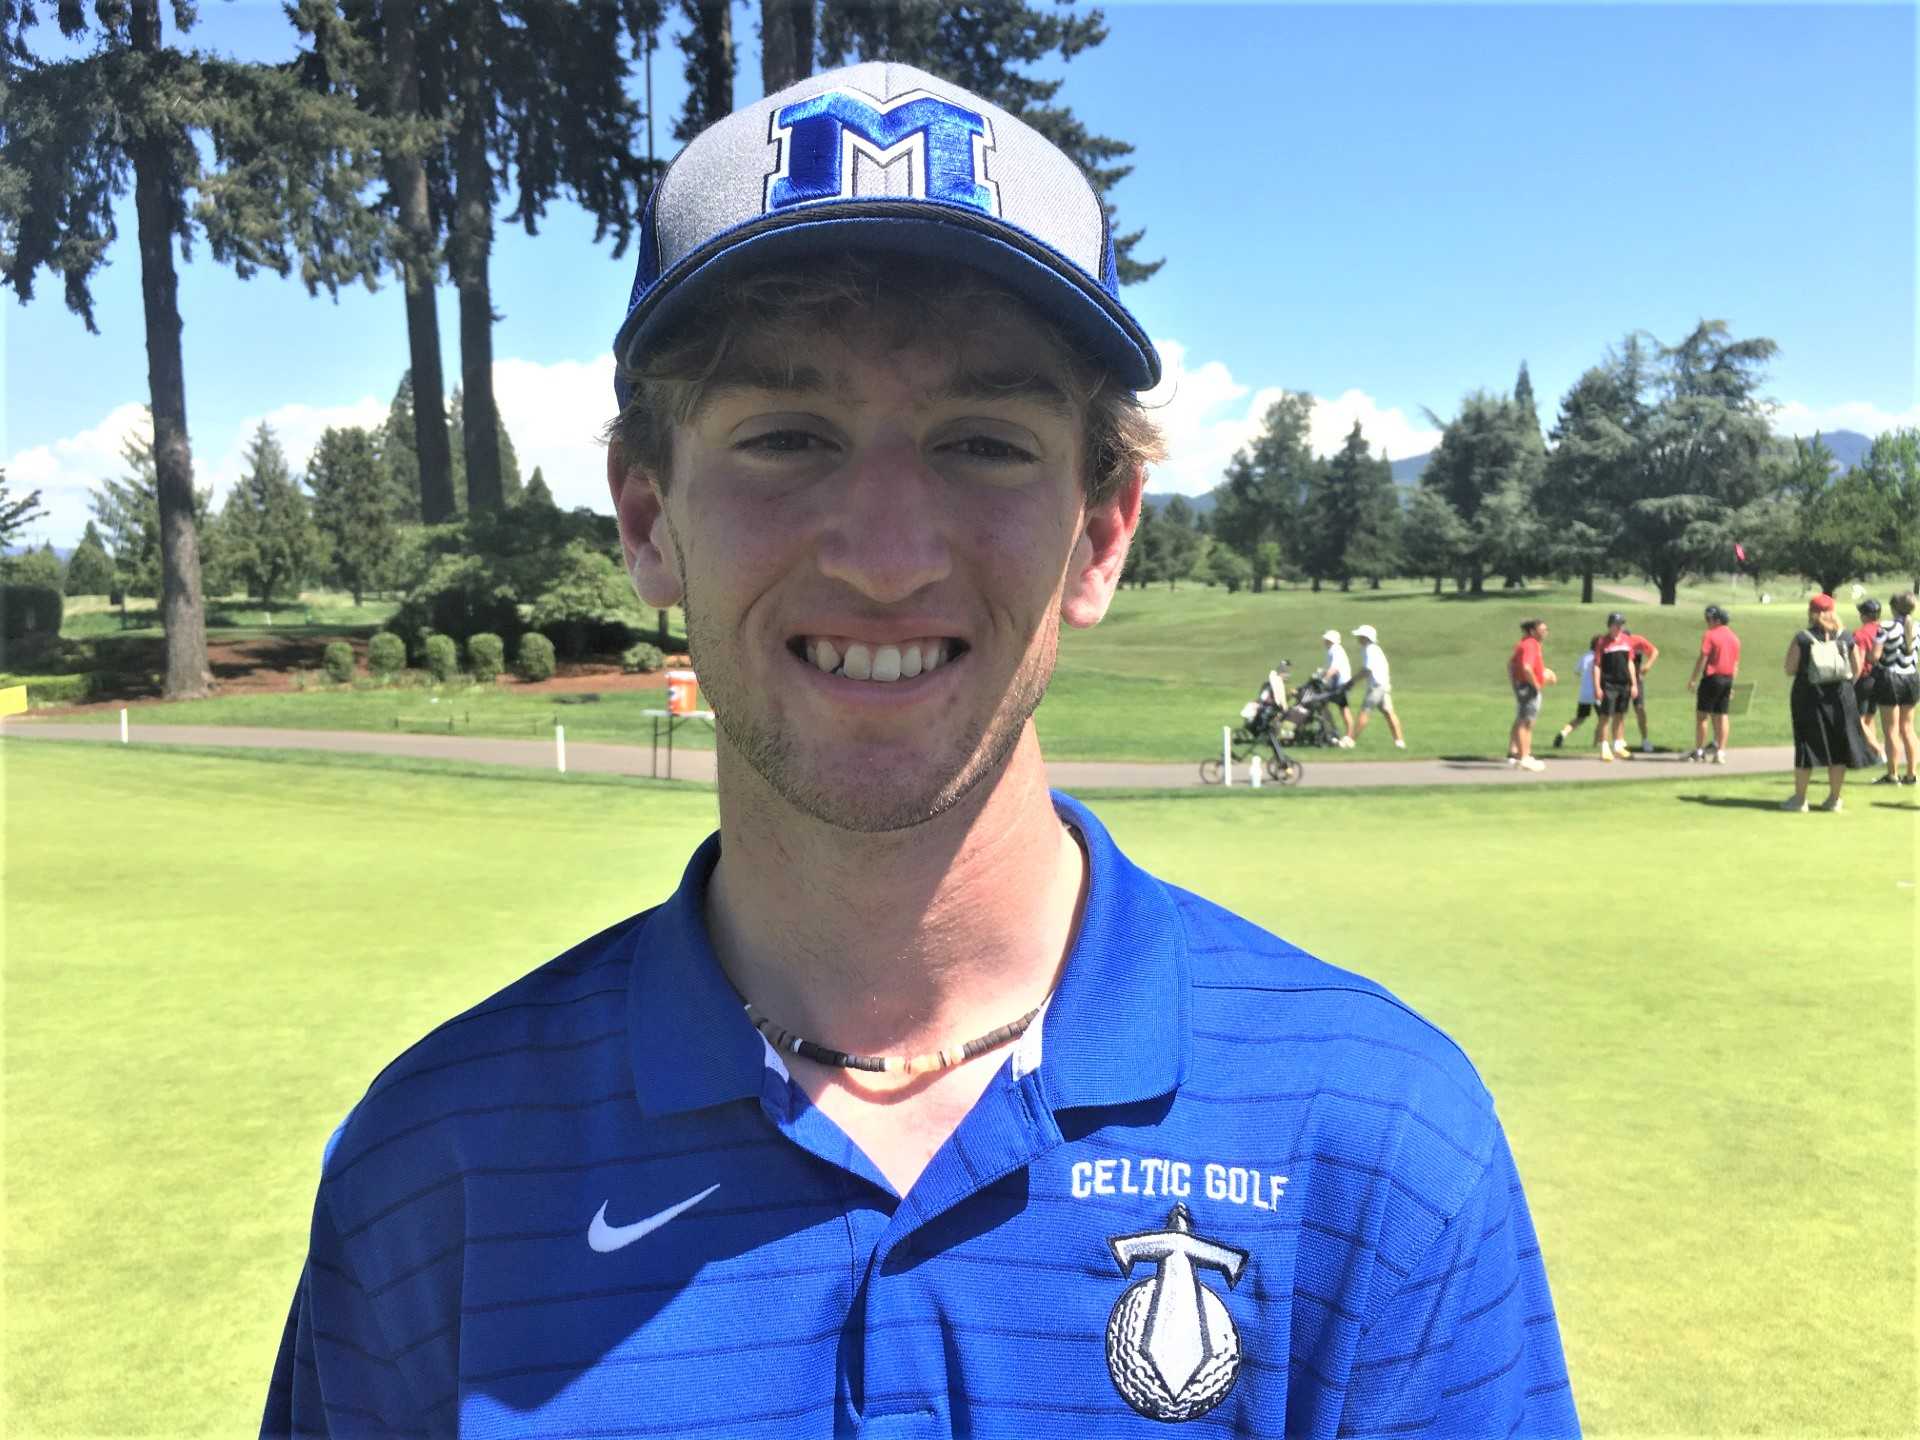 McNary's Colby Sullivan shot a 3-under 141 to win the 6A boys tournament at Emerald Valley Golf Club.